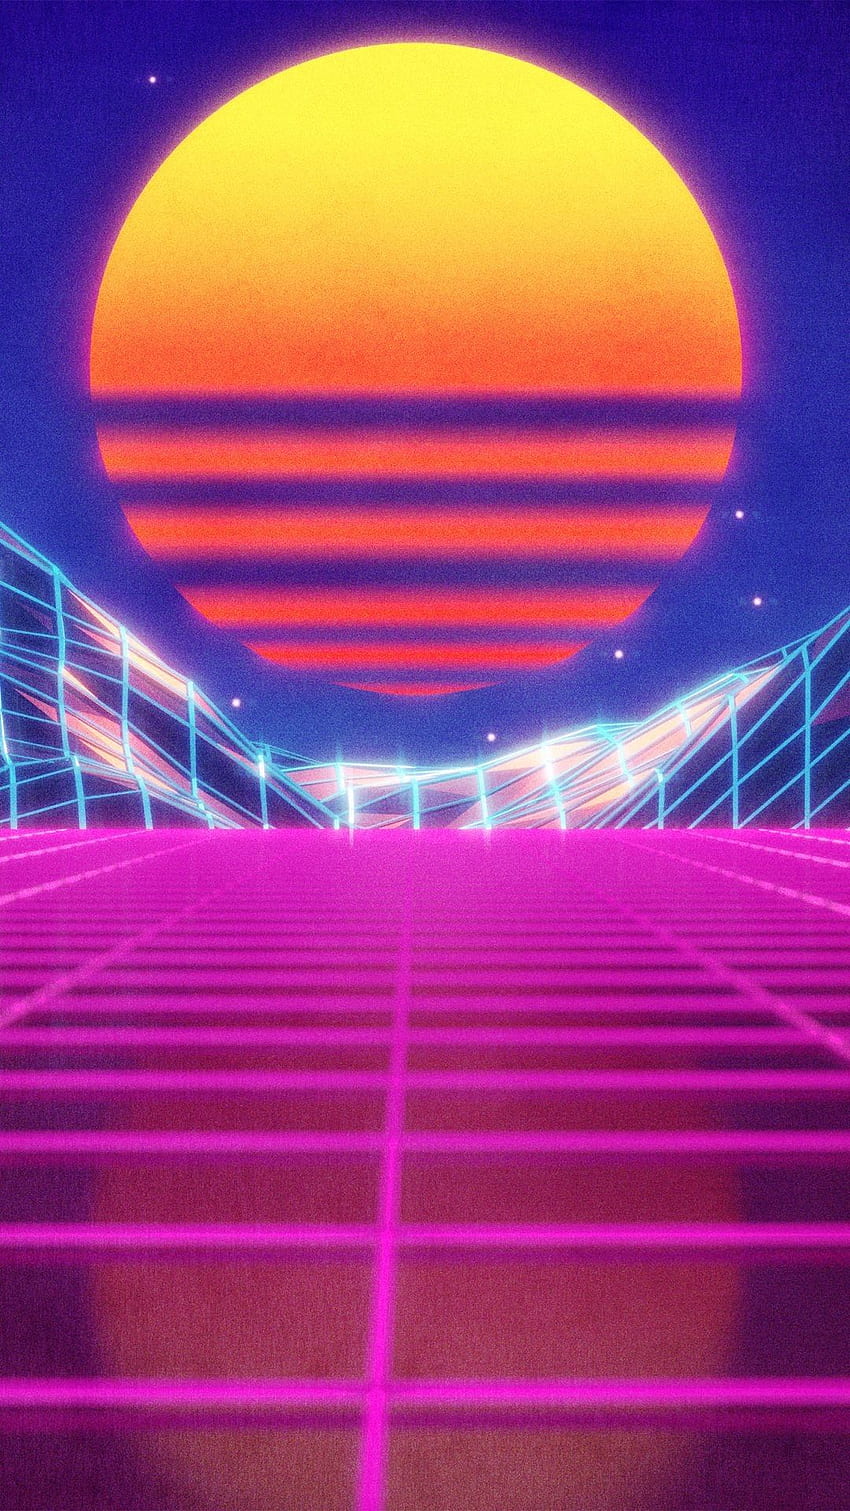 65 Retro 80s - Android, iPhone, Background / (, ) (png / jpg) (2021), 80s 音楽 HD電話の壁紙